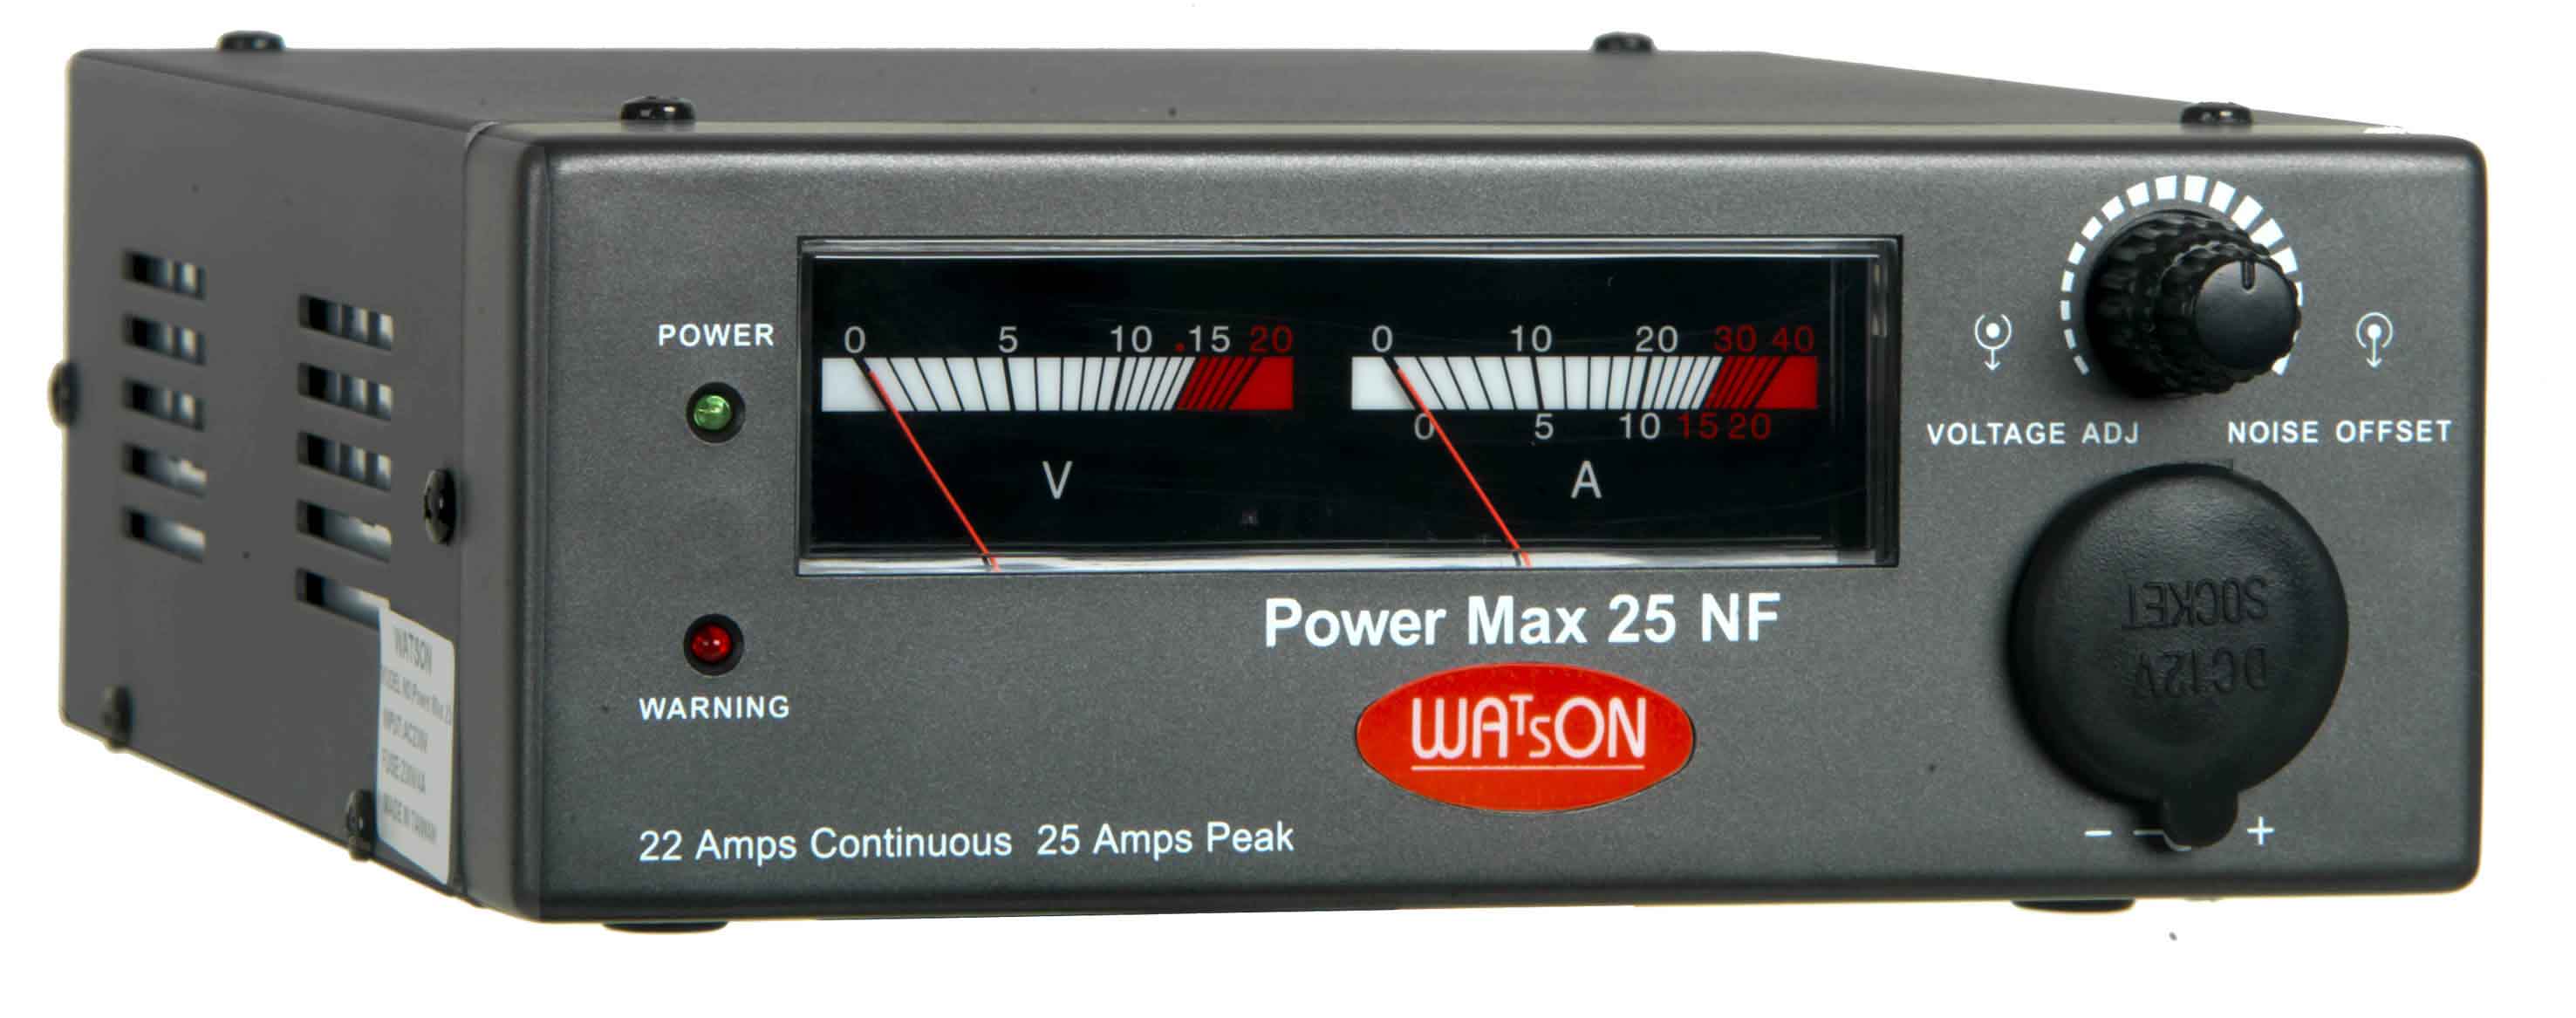 Power-Max-25NF "No Noise" switch mode power supplies